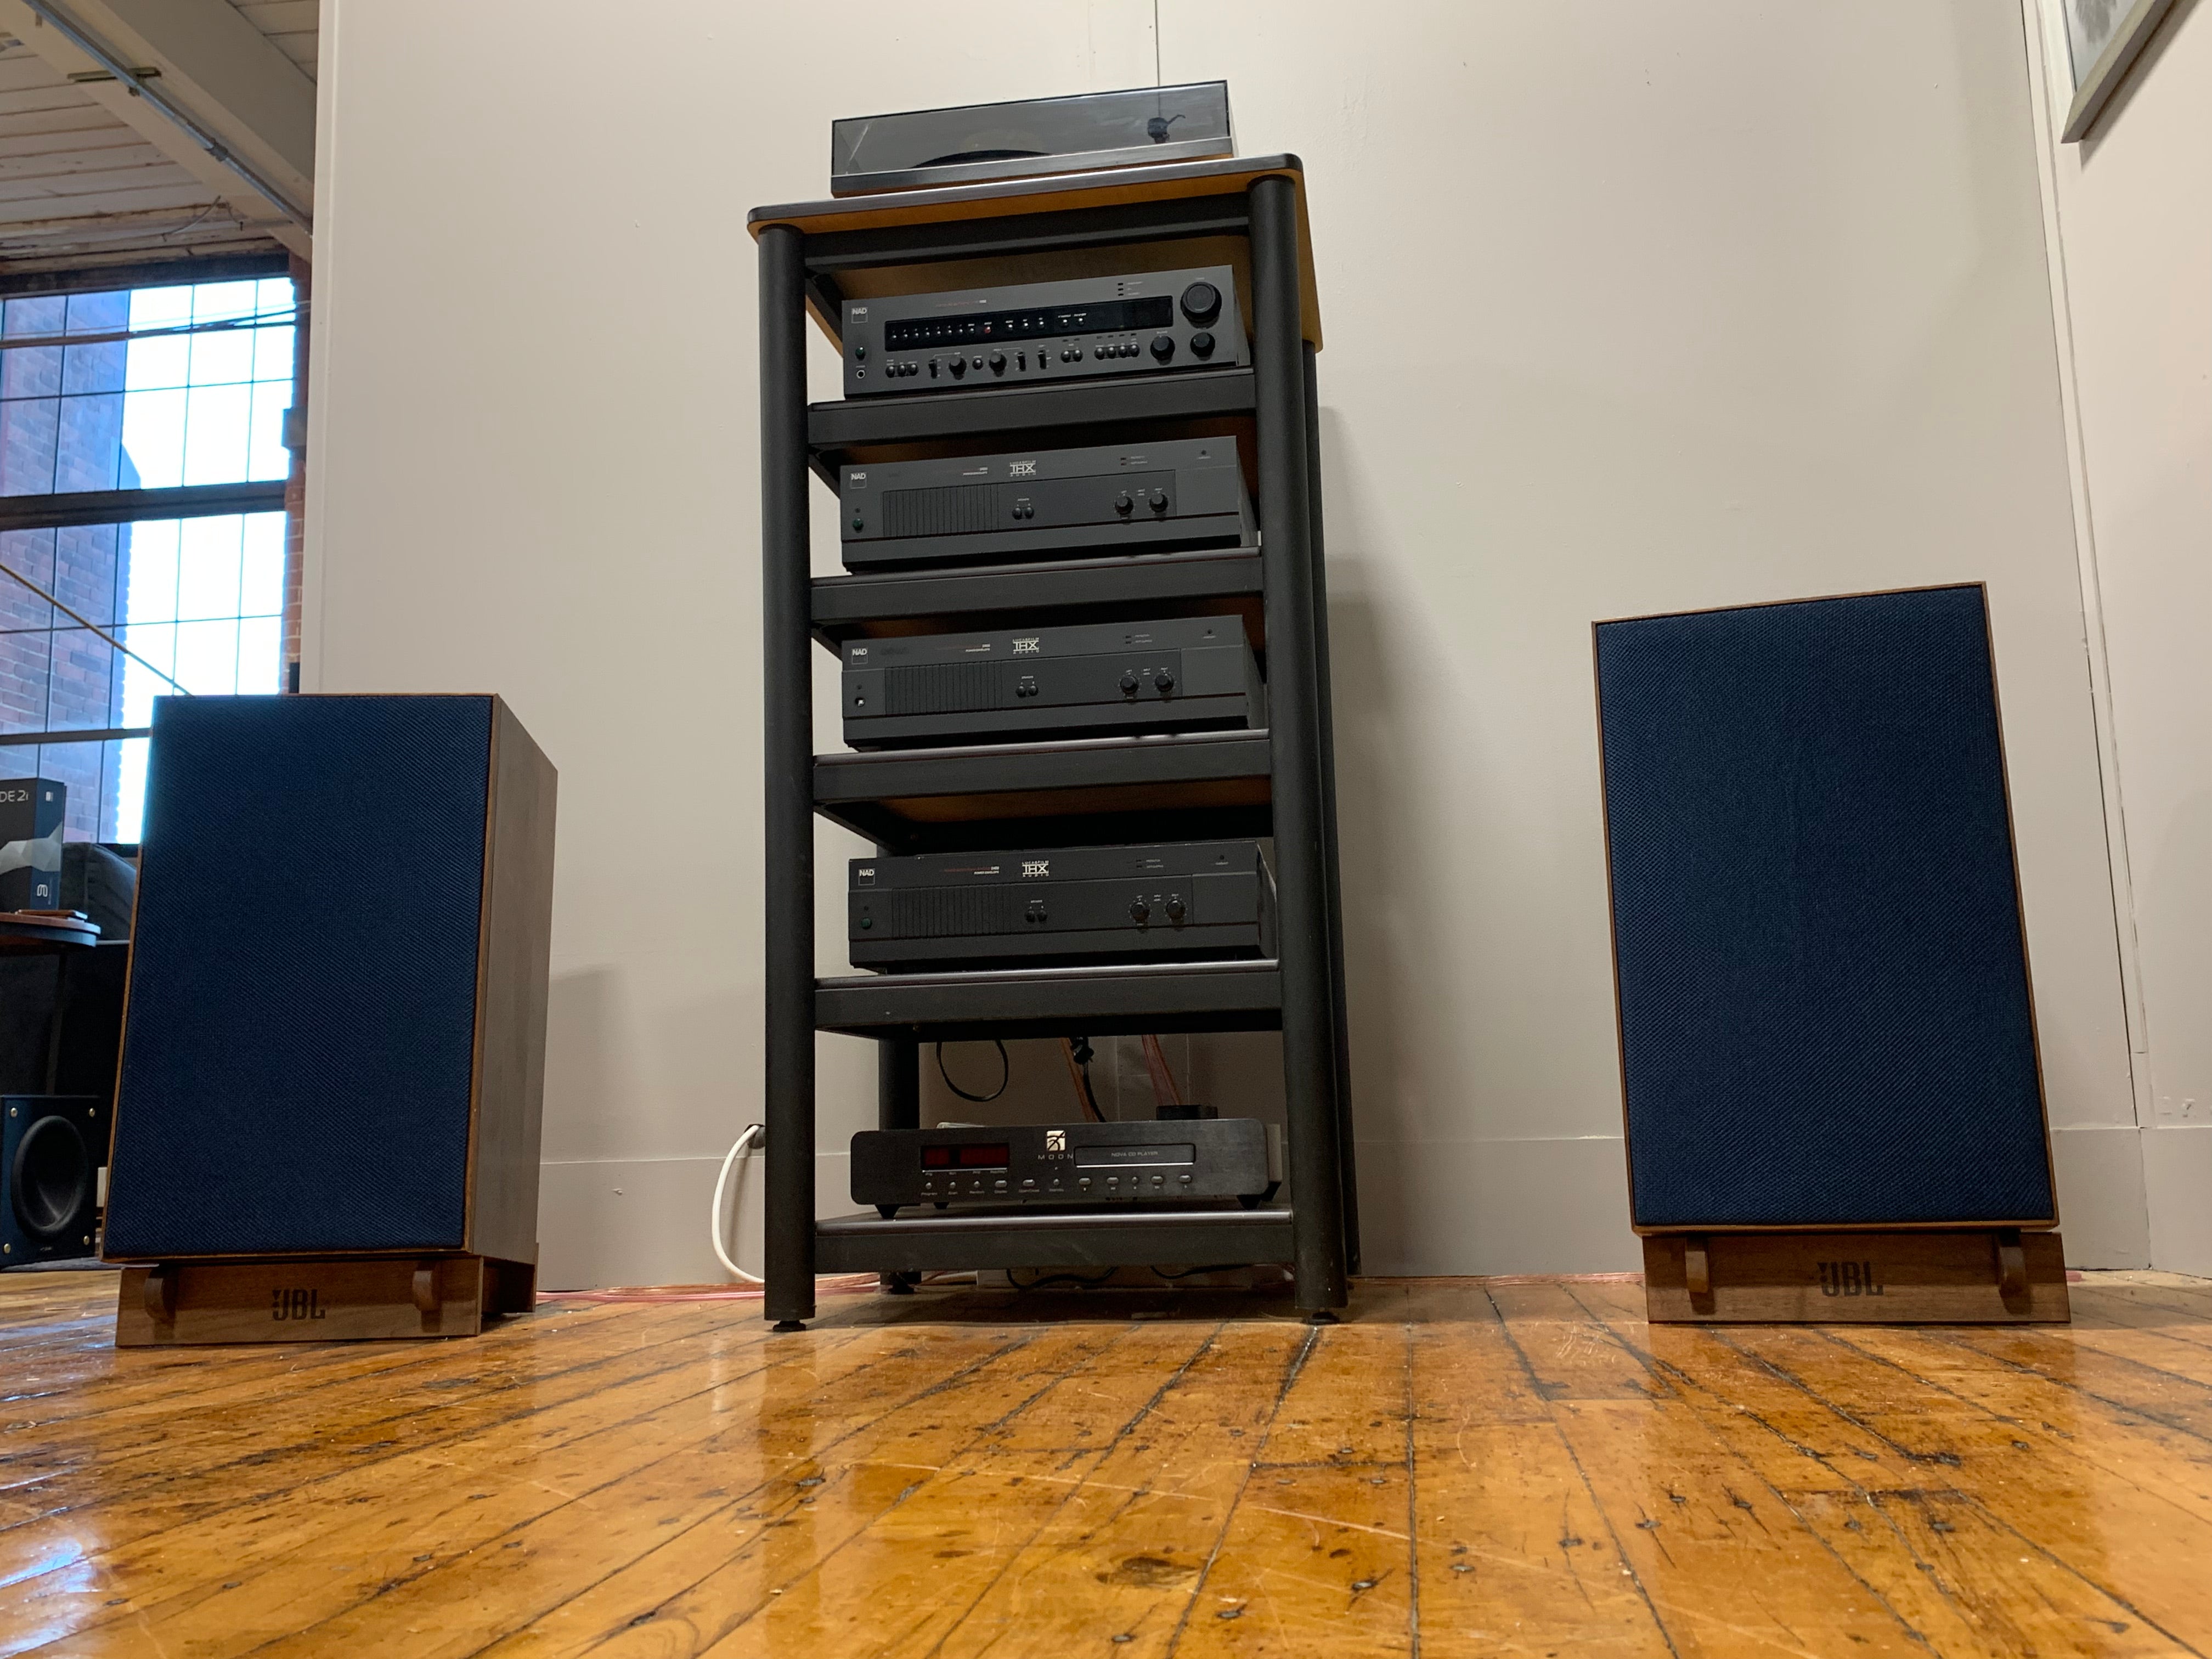 JBL L100 Century Speakers with Stands - SOLD